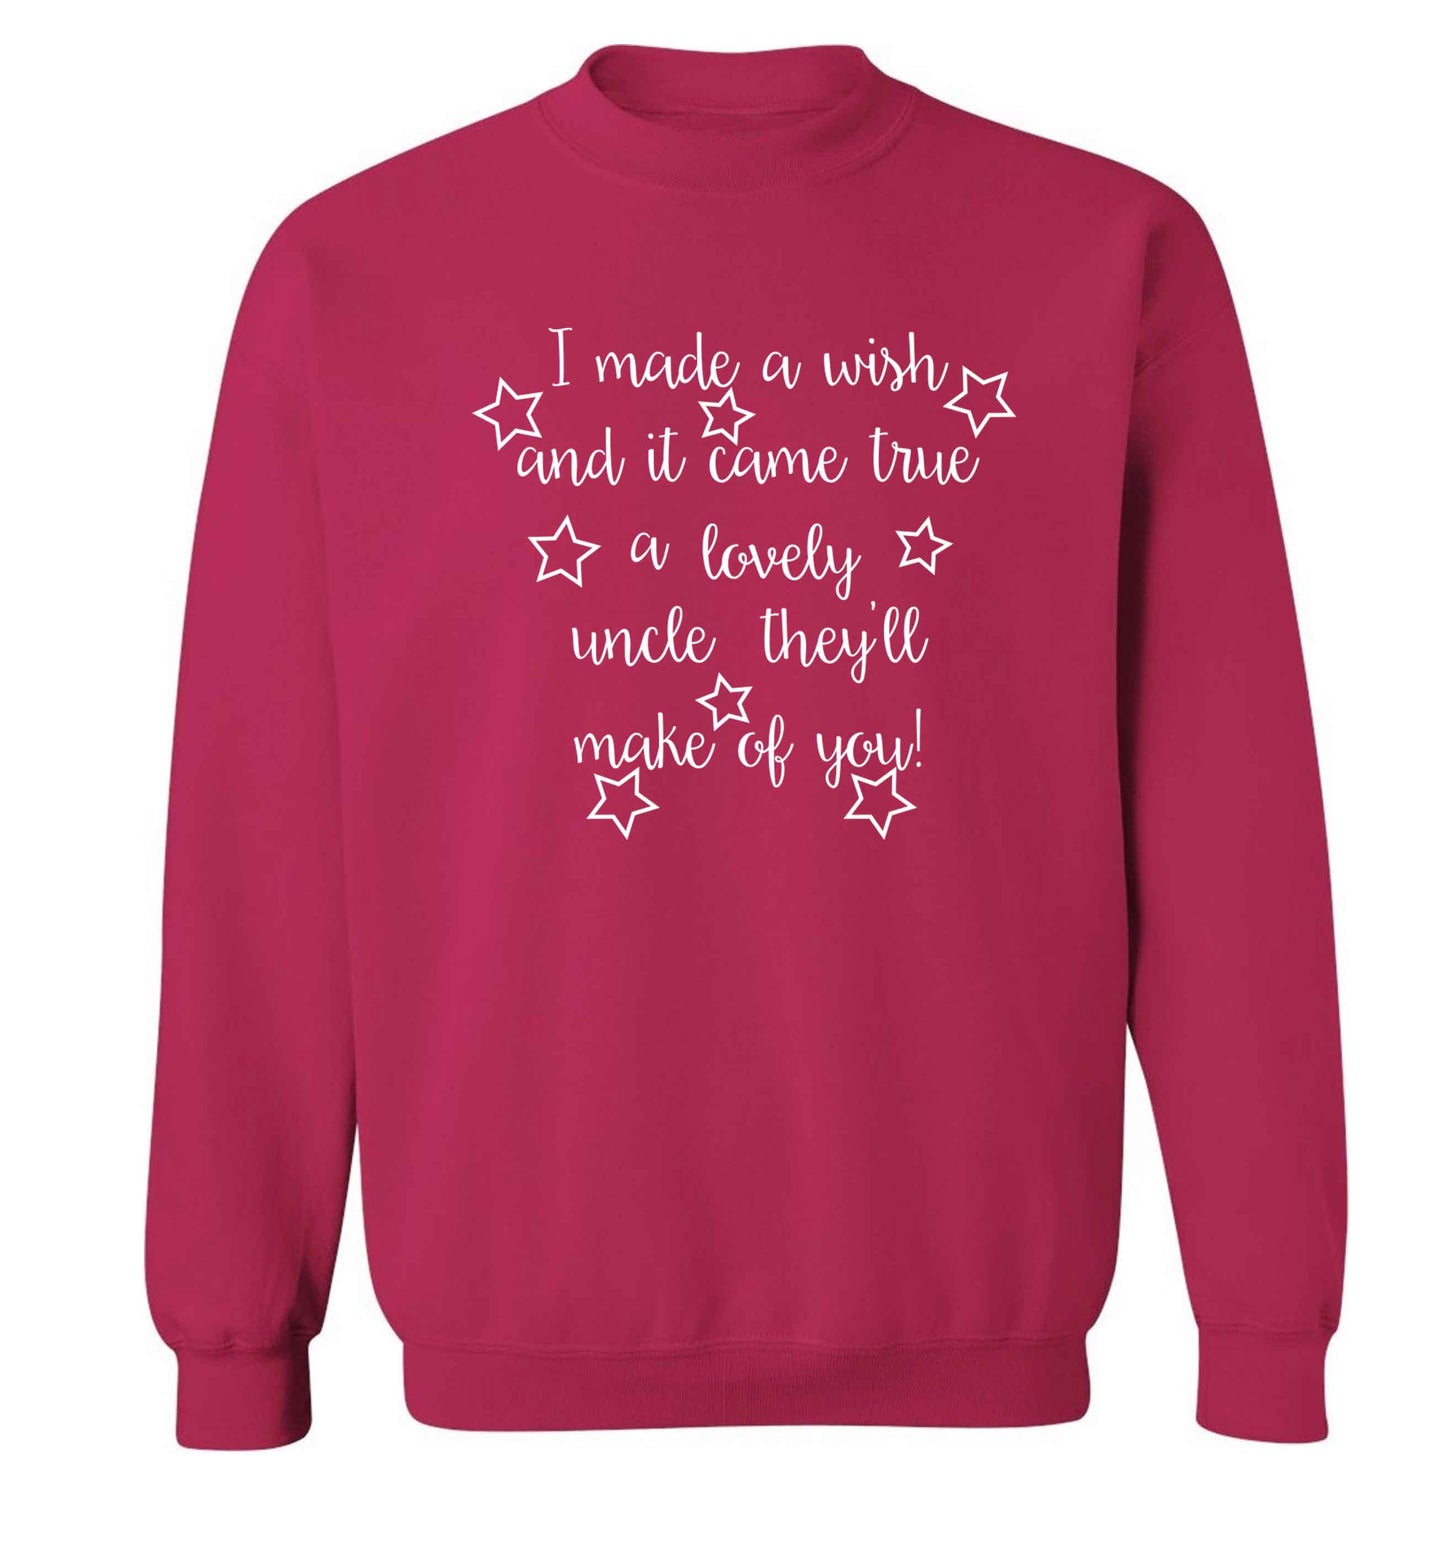 I made a wish and it came true a lovely uncle they'll make of you! Adult's unisex pink Sweater 2XL